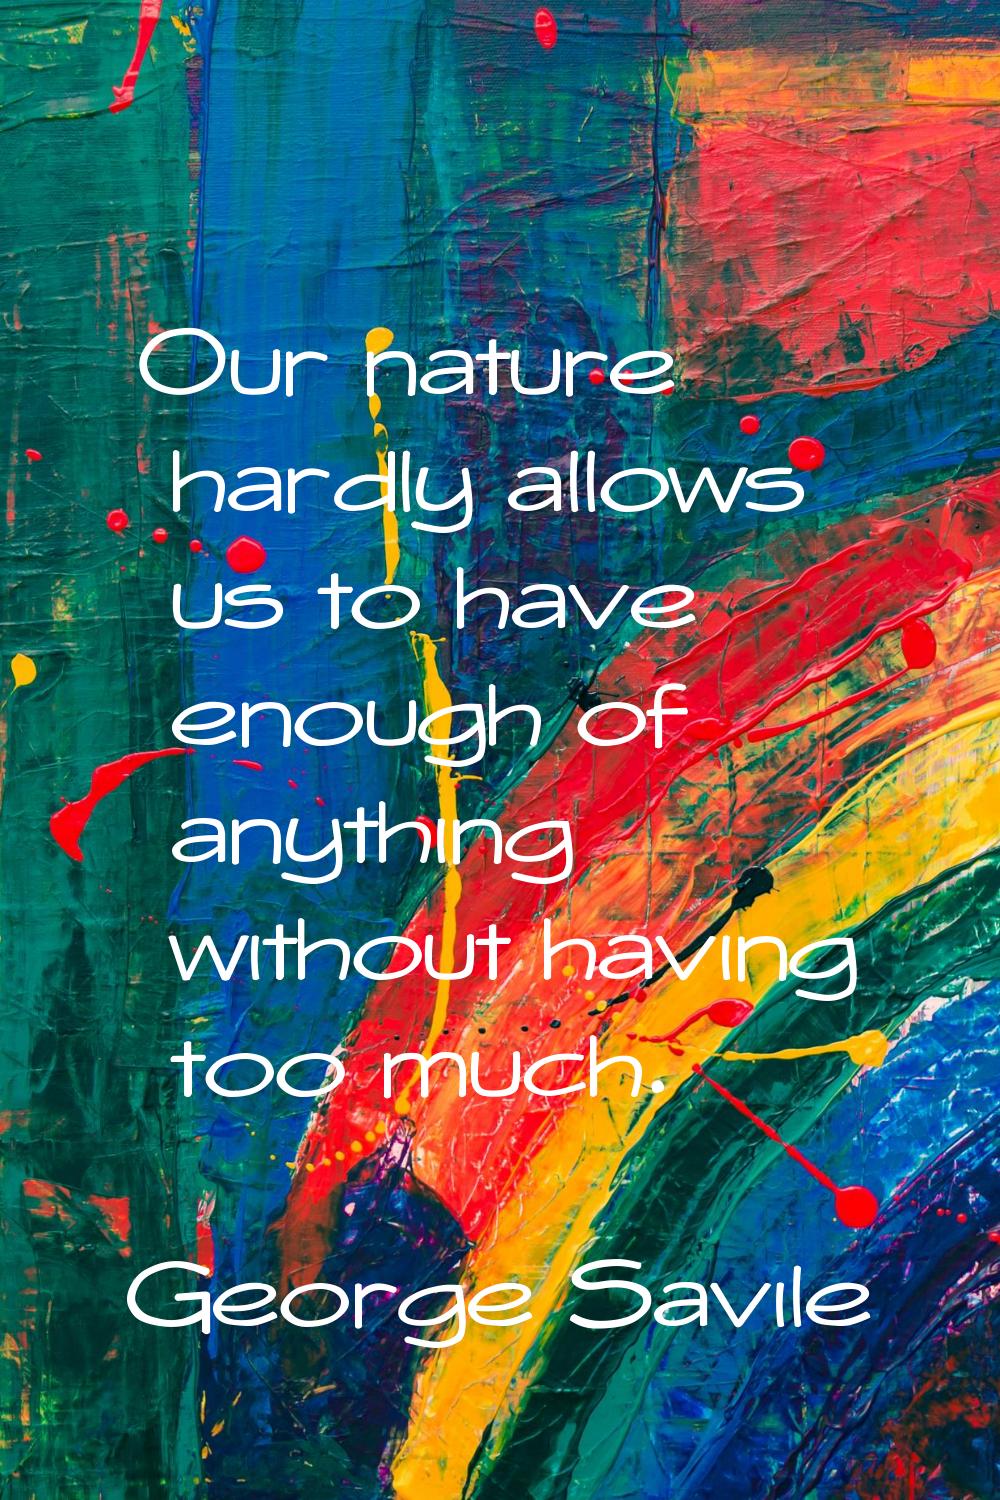 Our nature hardly allows us to have enough of anything without having too much.